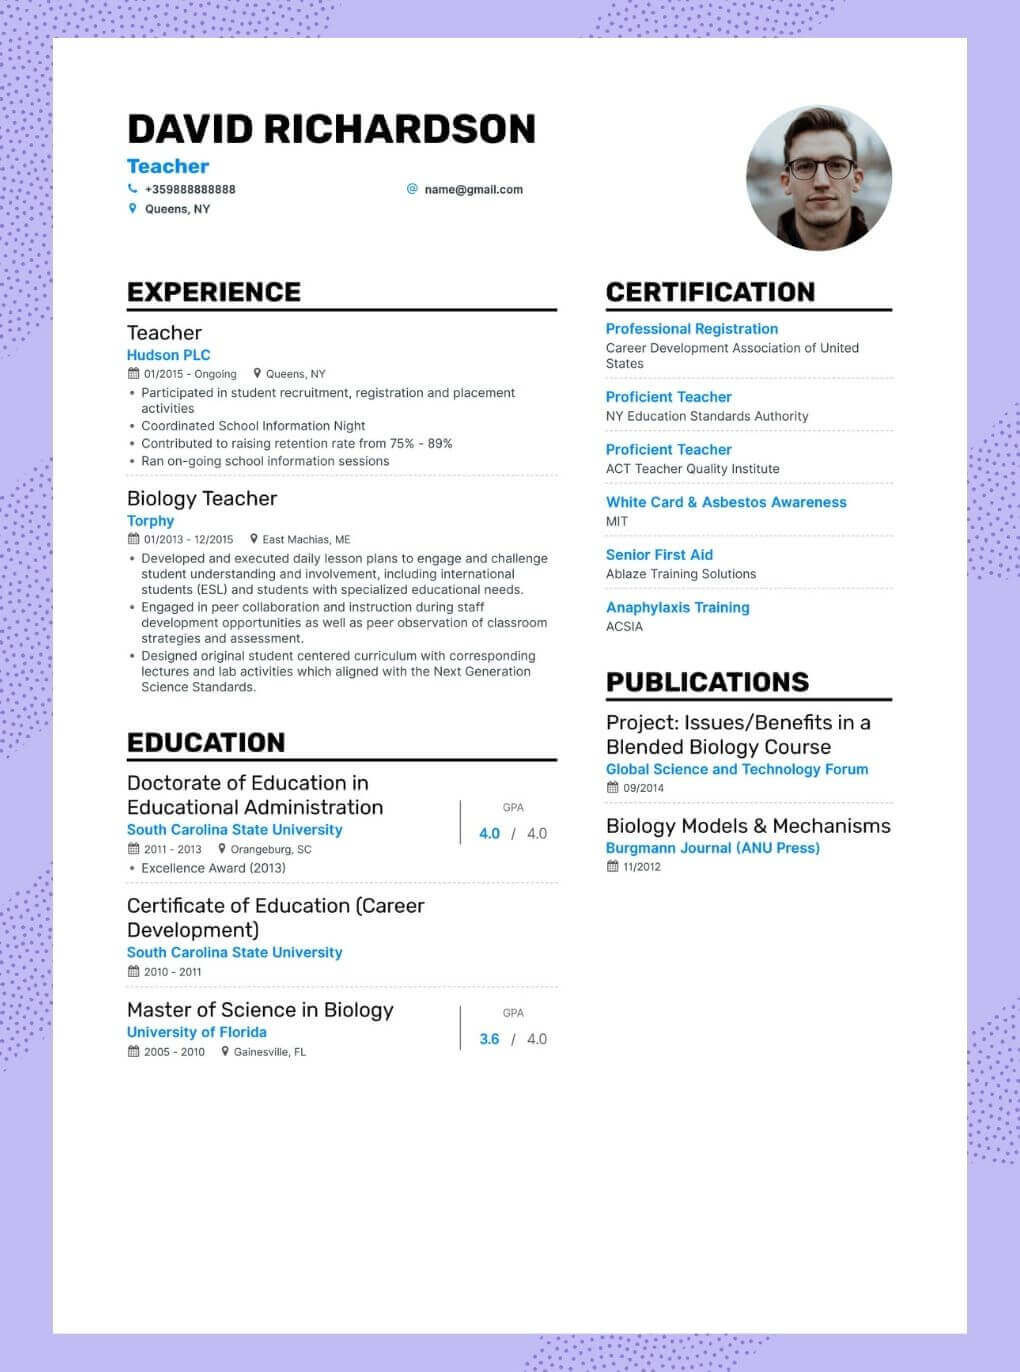 Sample Resume with Application Type Details Resume Job Description: Samples & Tips to Help You Enhance Your …